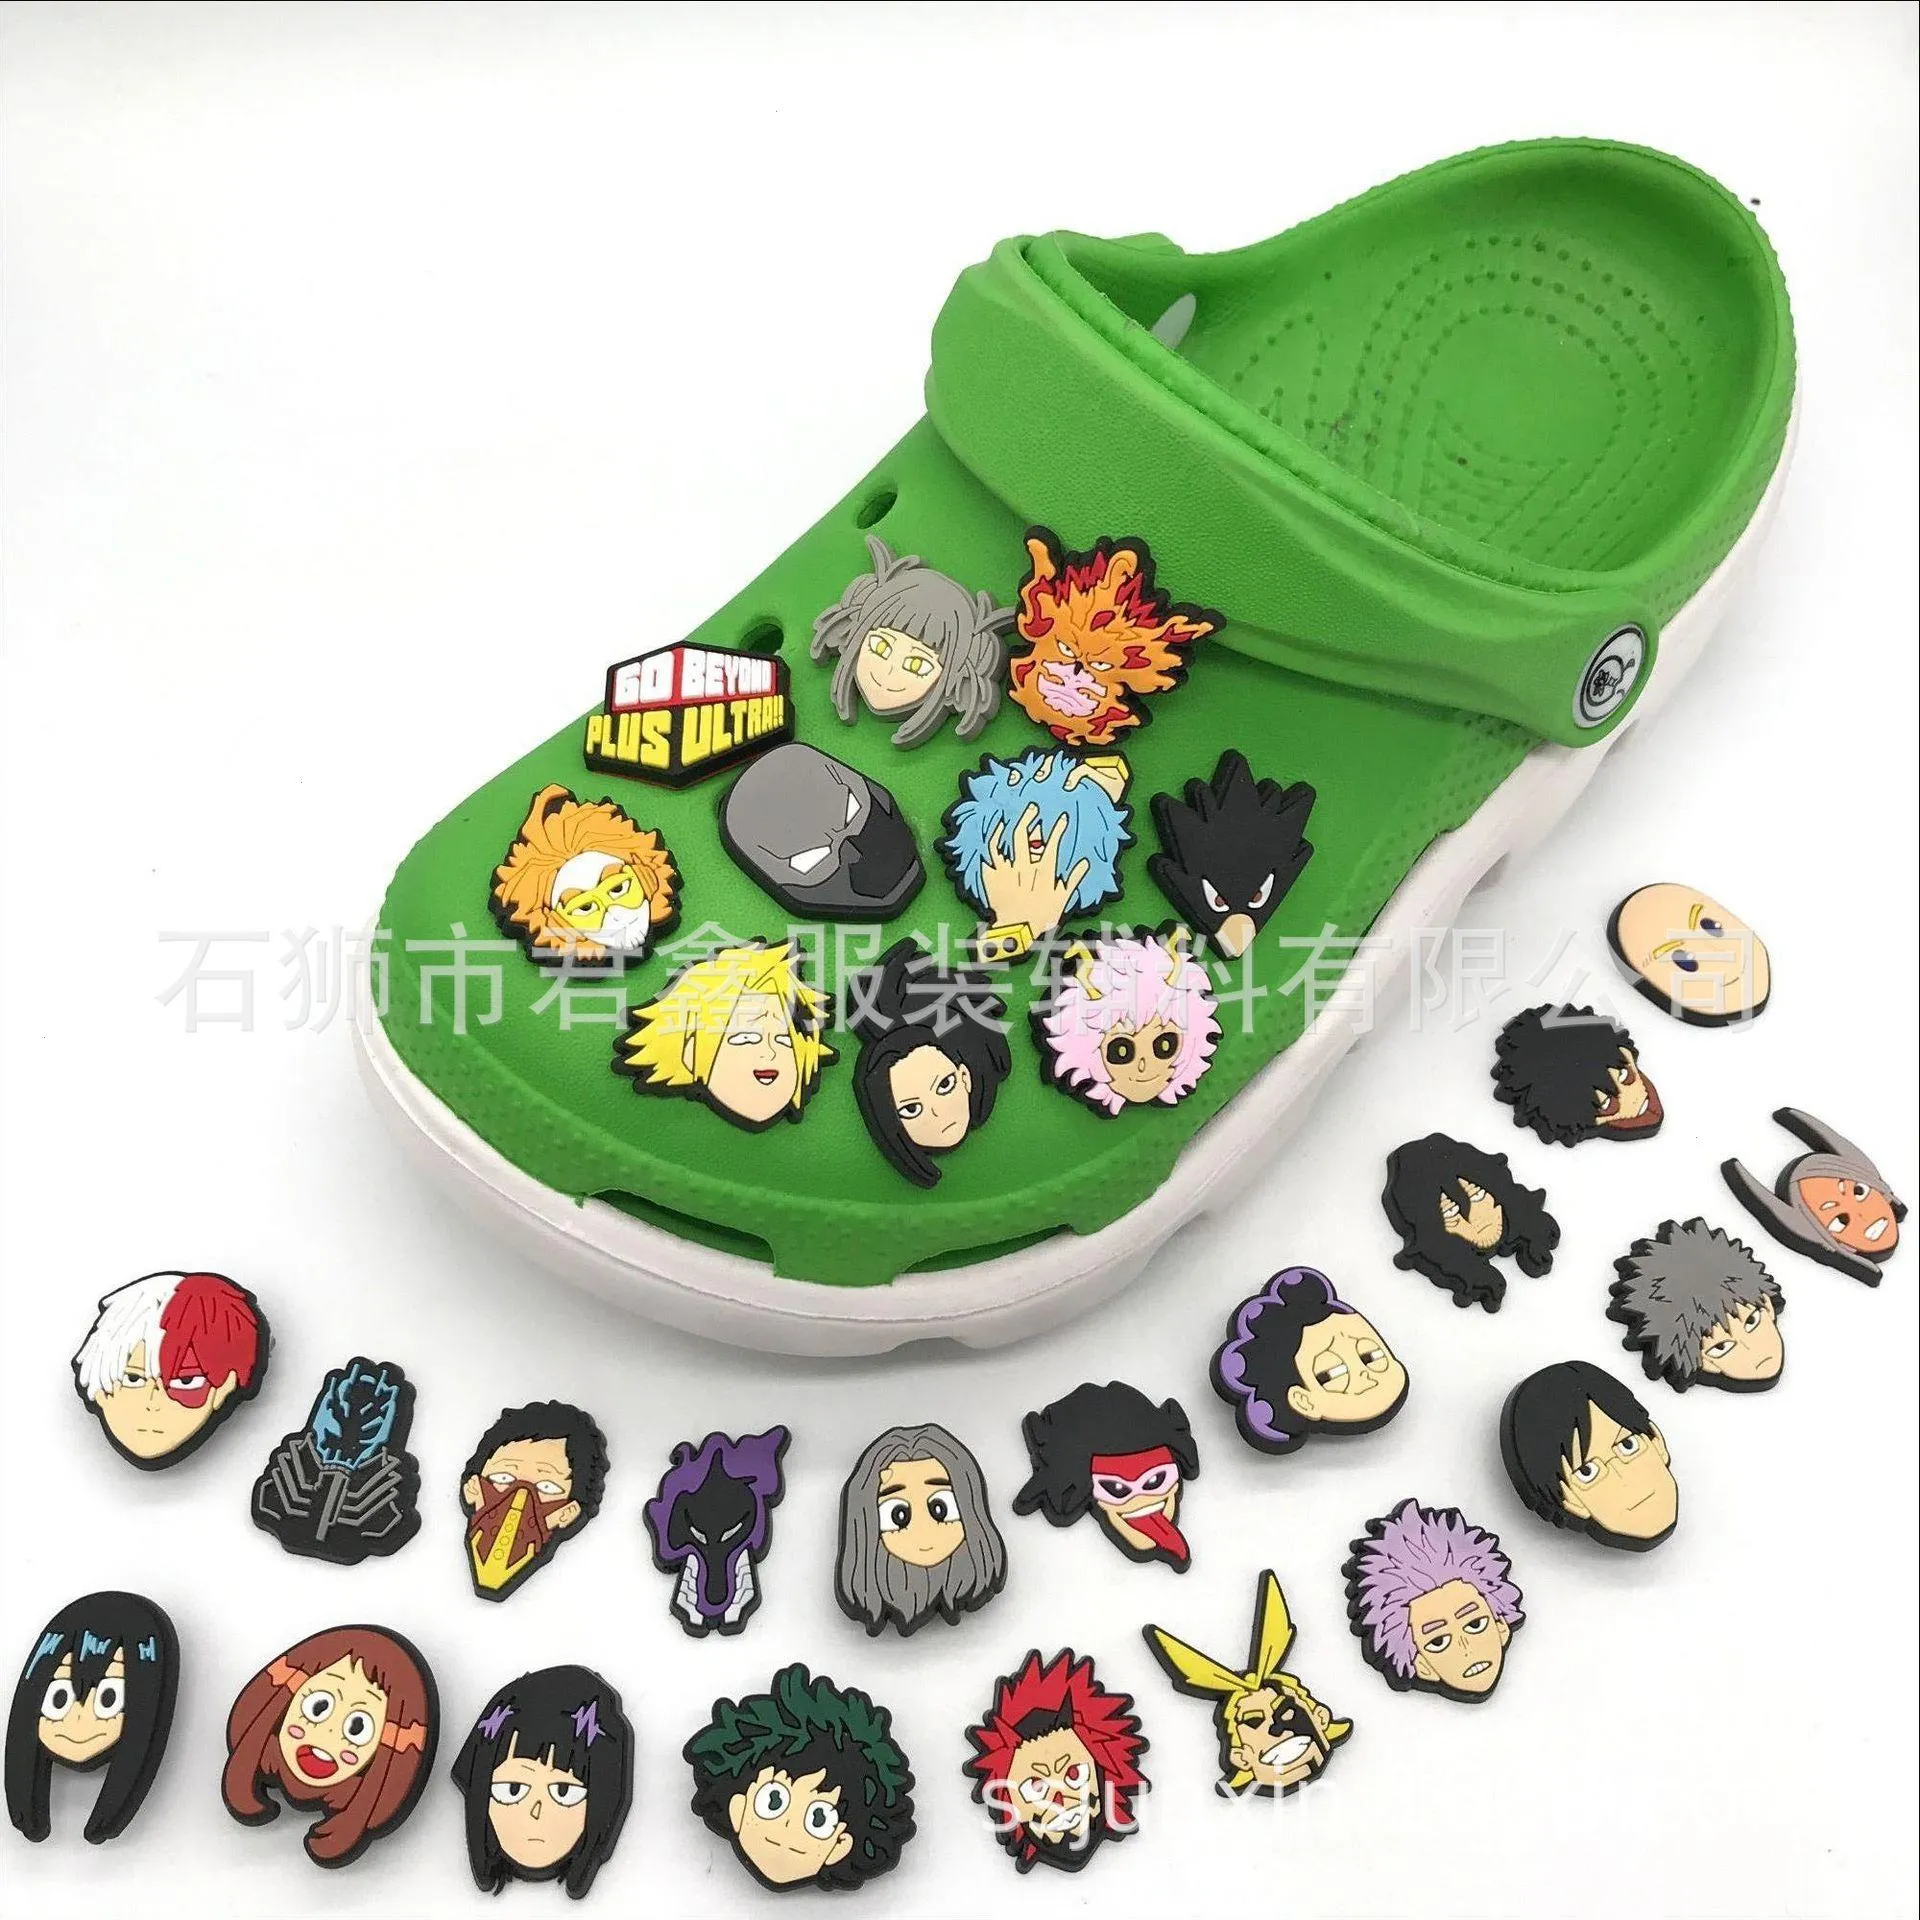 my hero academy charms Anime charms wholesale childhood memories funny gift cartoon charms shoe accessories pvc decoration buckle soft rubber clog charms